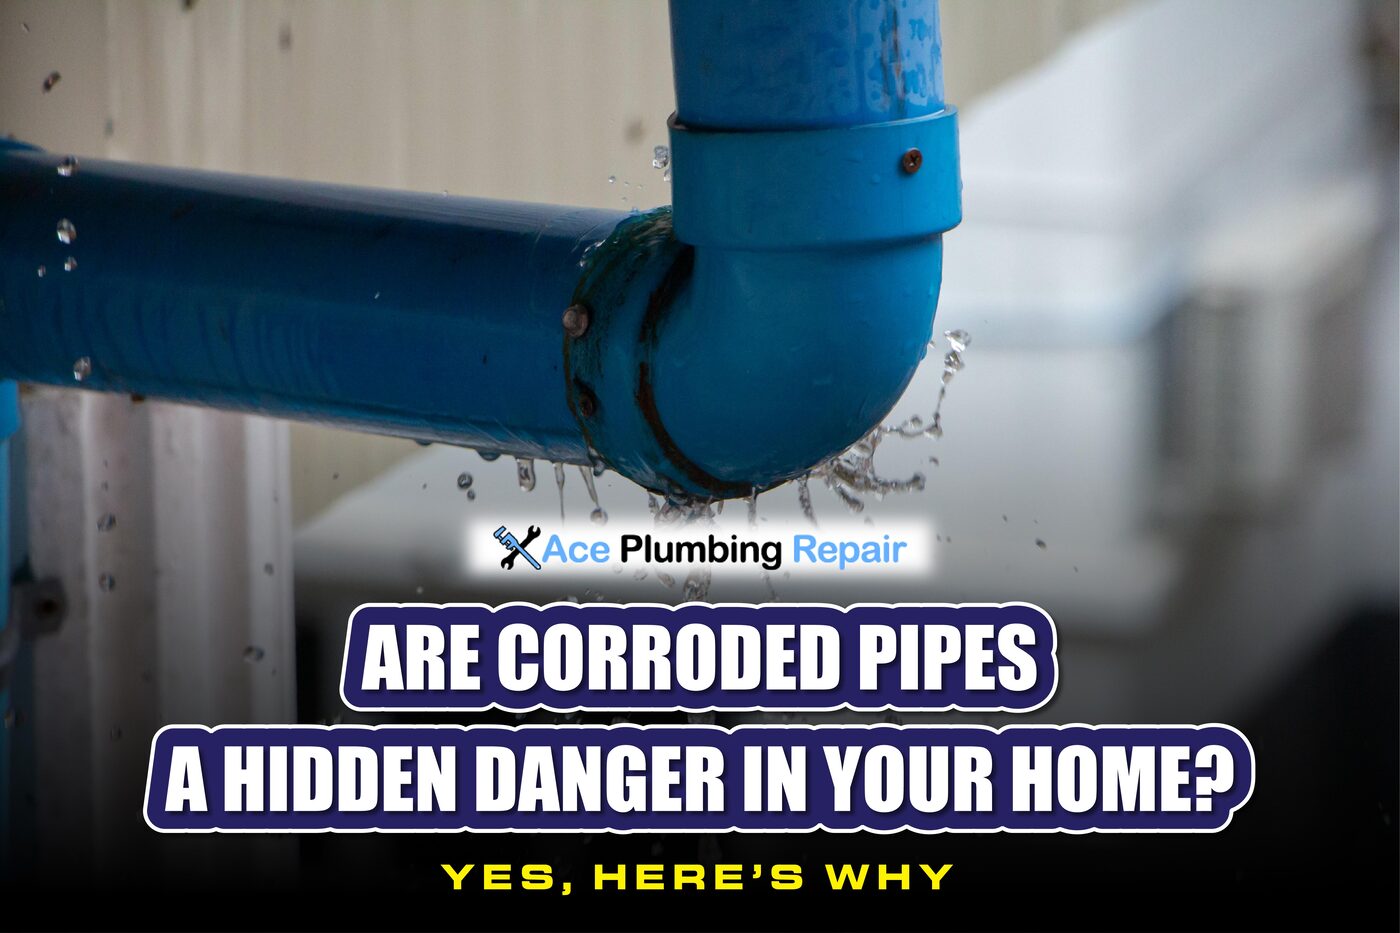 Are corroded pipes dangerous